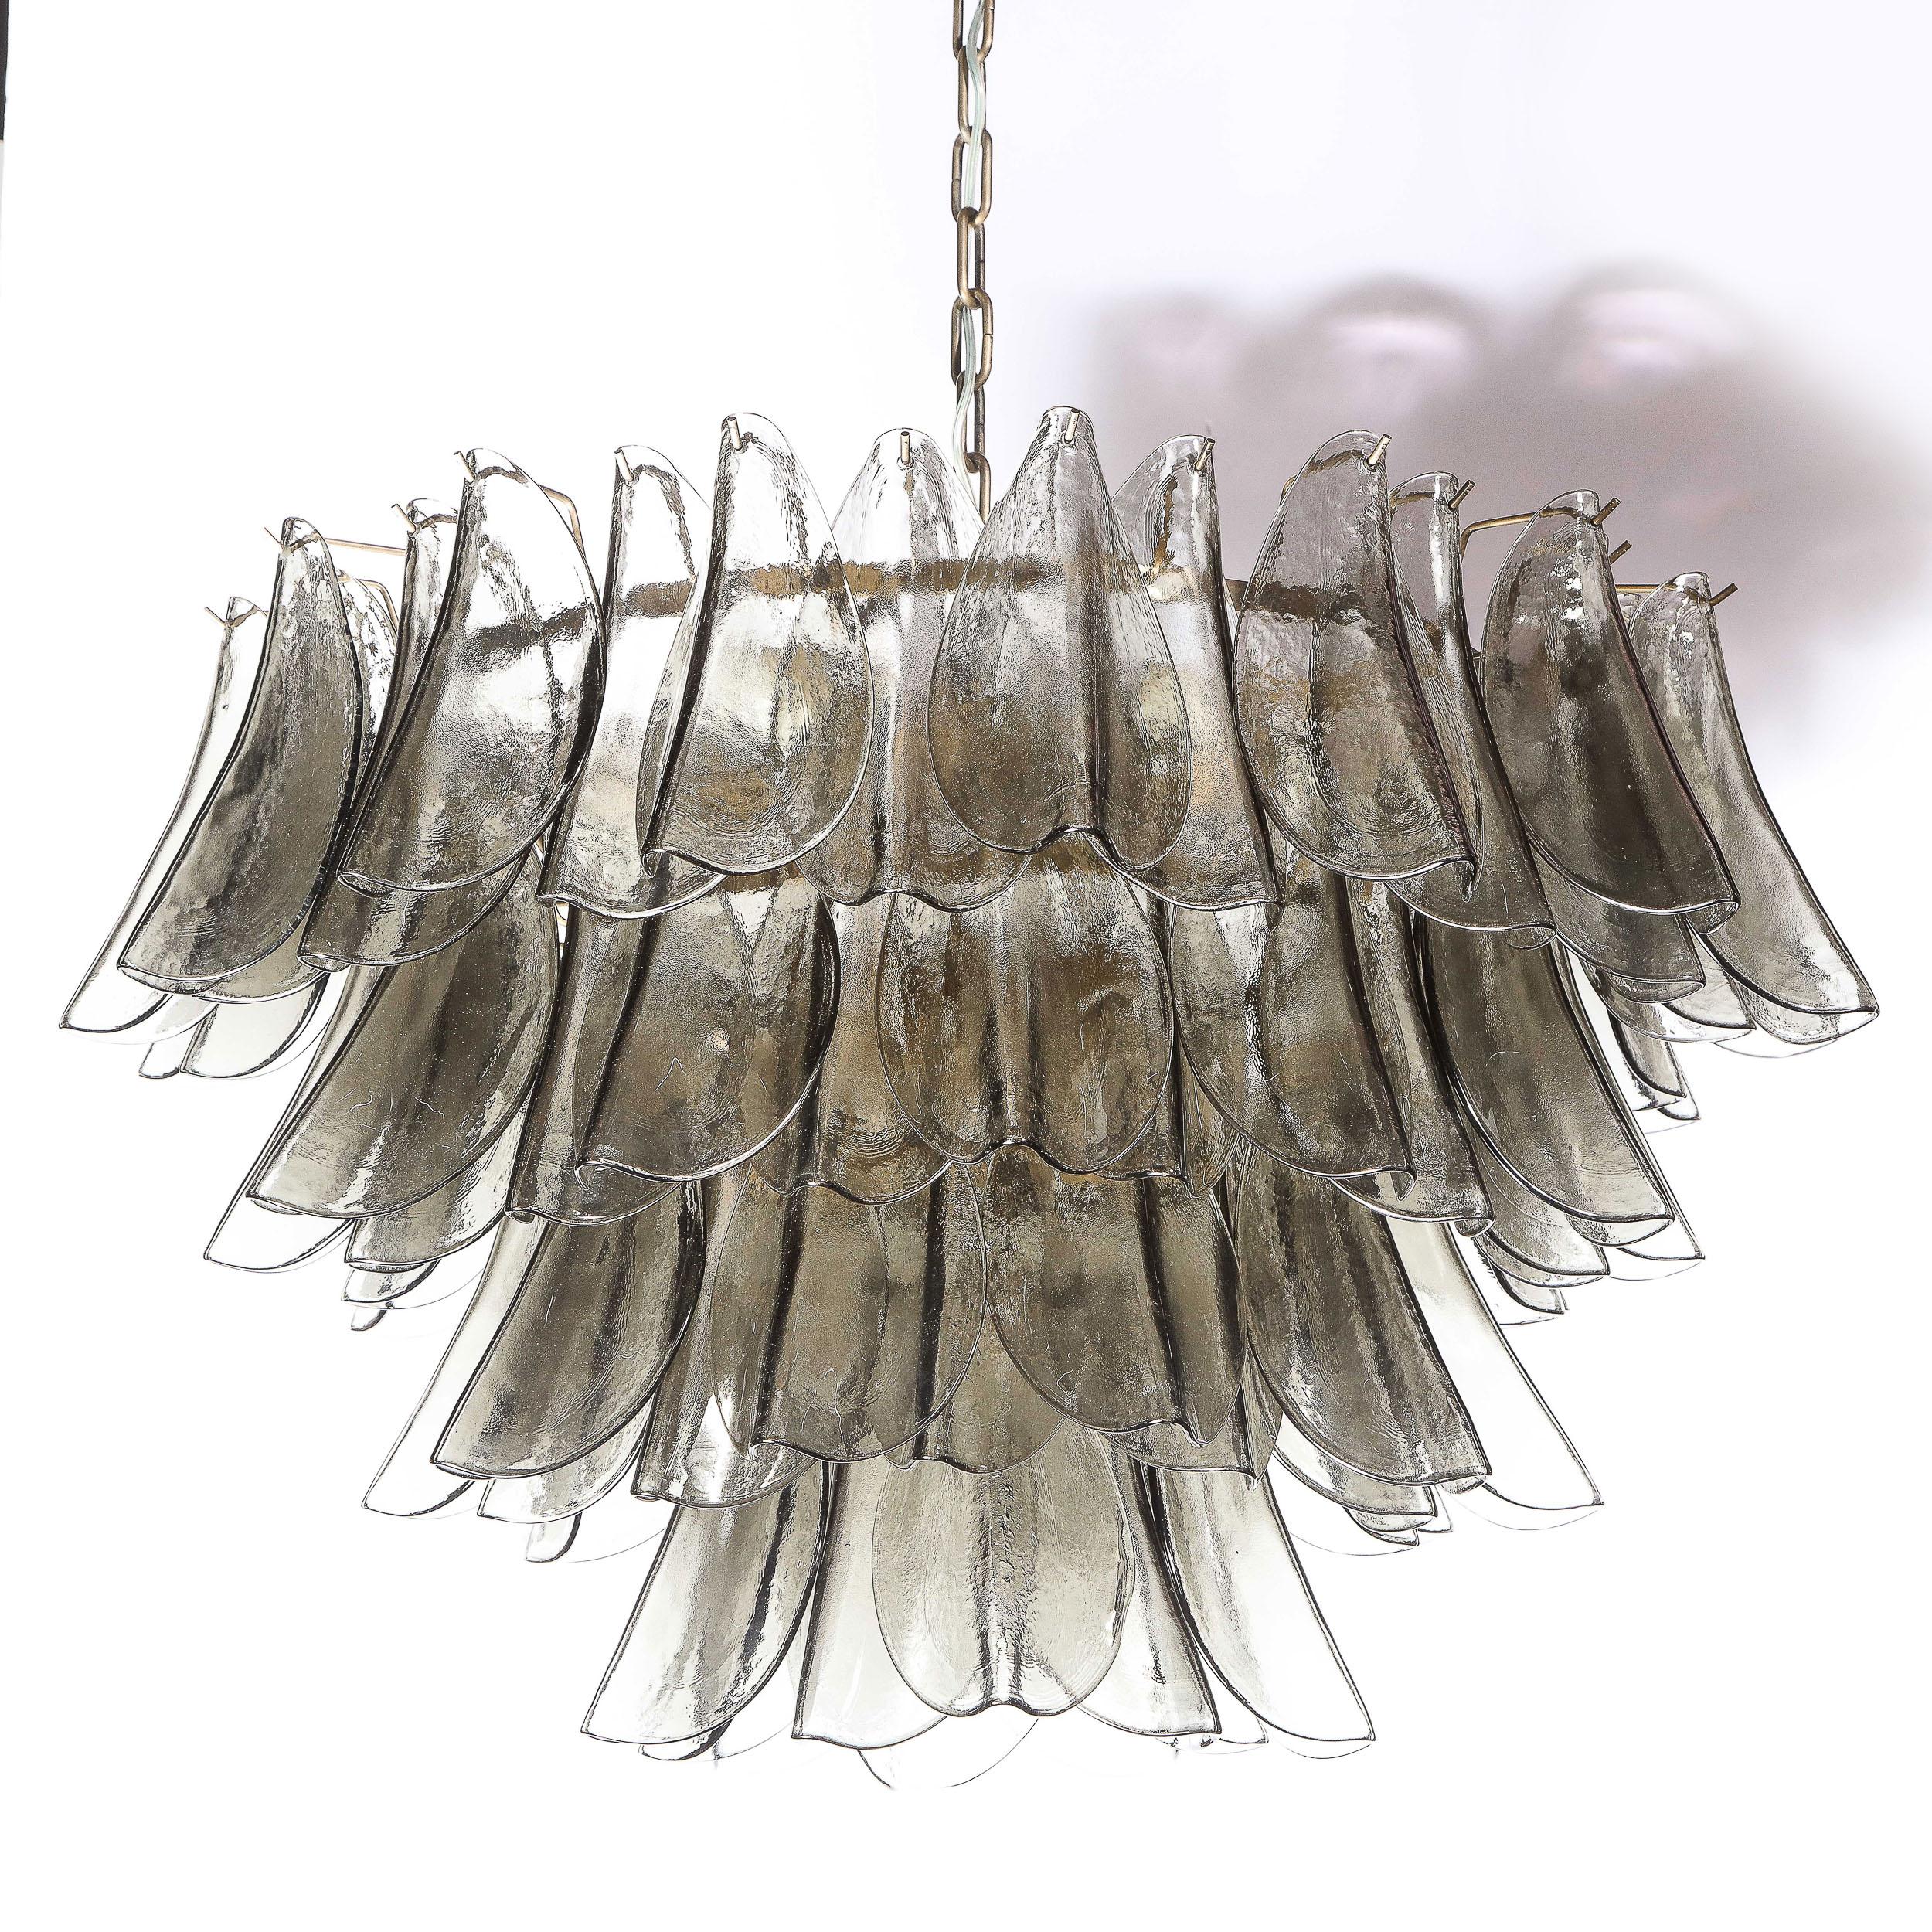 This refined and sophisticated chandelier was realized in Murano, Italy- the islands off the coast of Venice renowned for centuries for their superlative quality glass production. It offers an abundance of handblown Murano glass shades in a Topaz